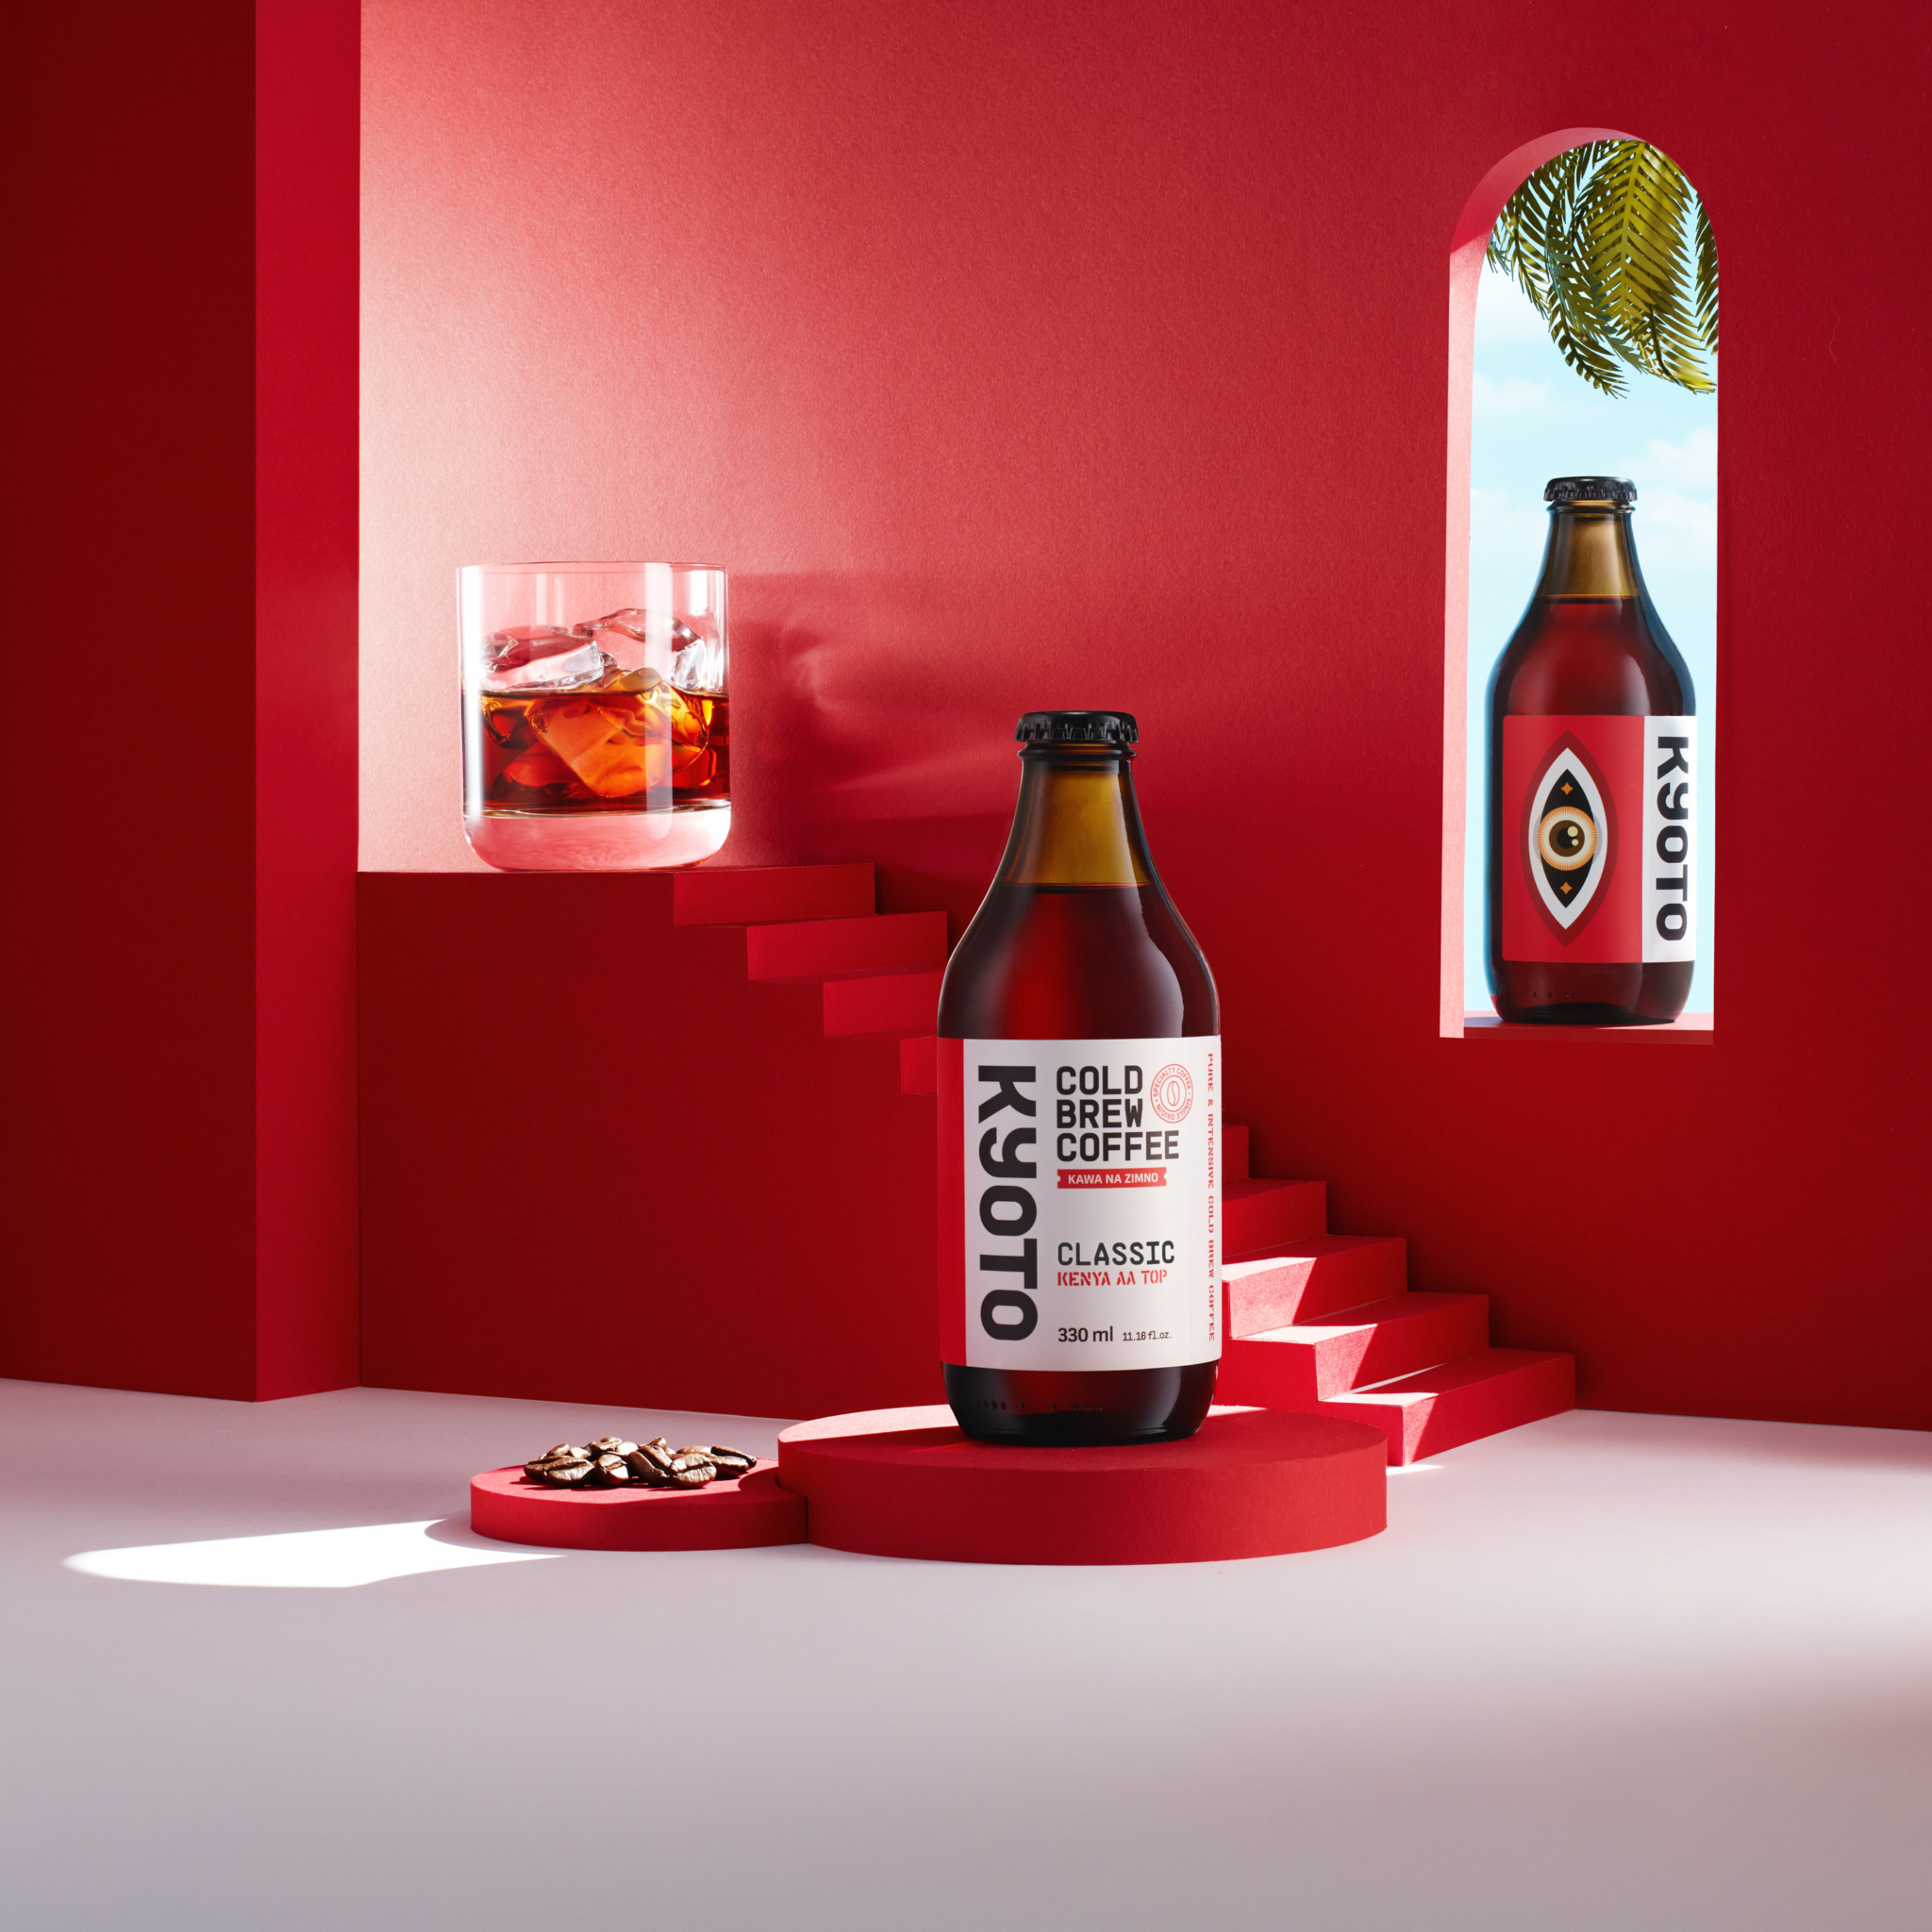 Cold Brew Coffee bottle on red background